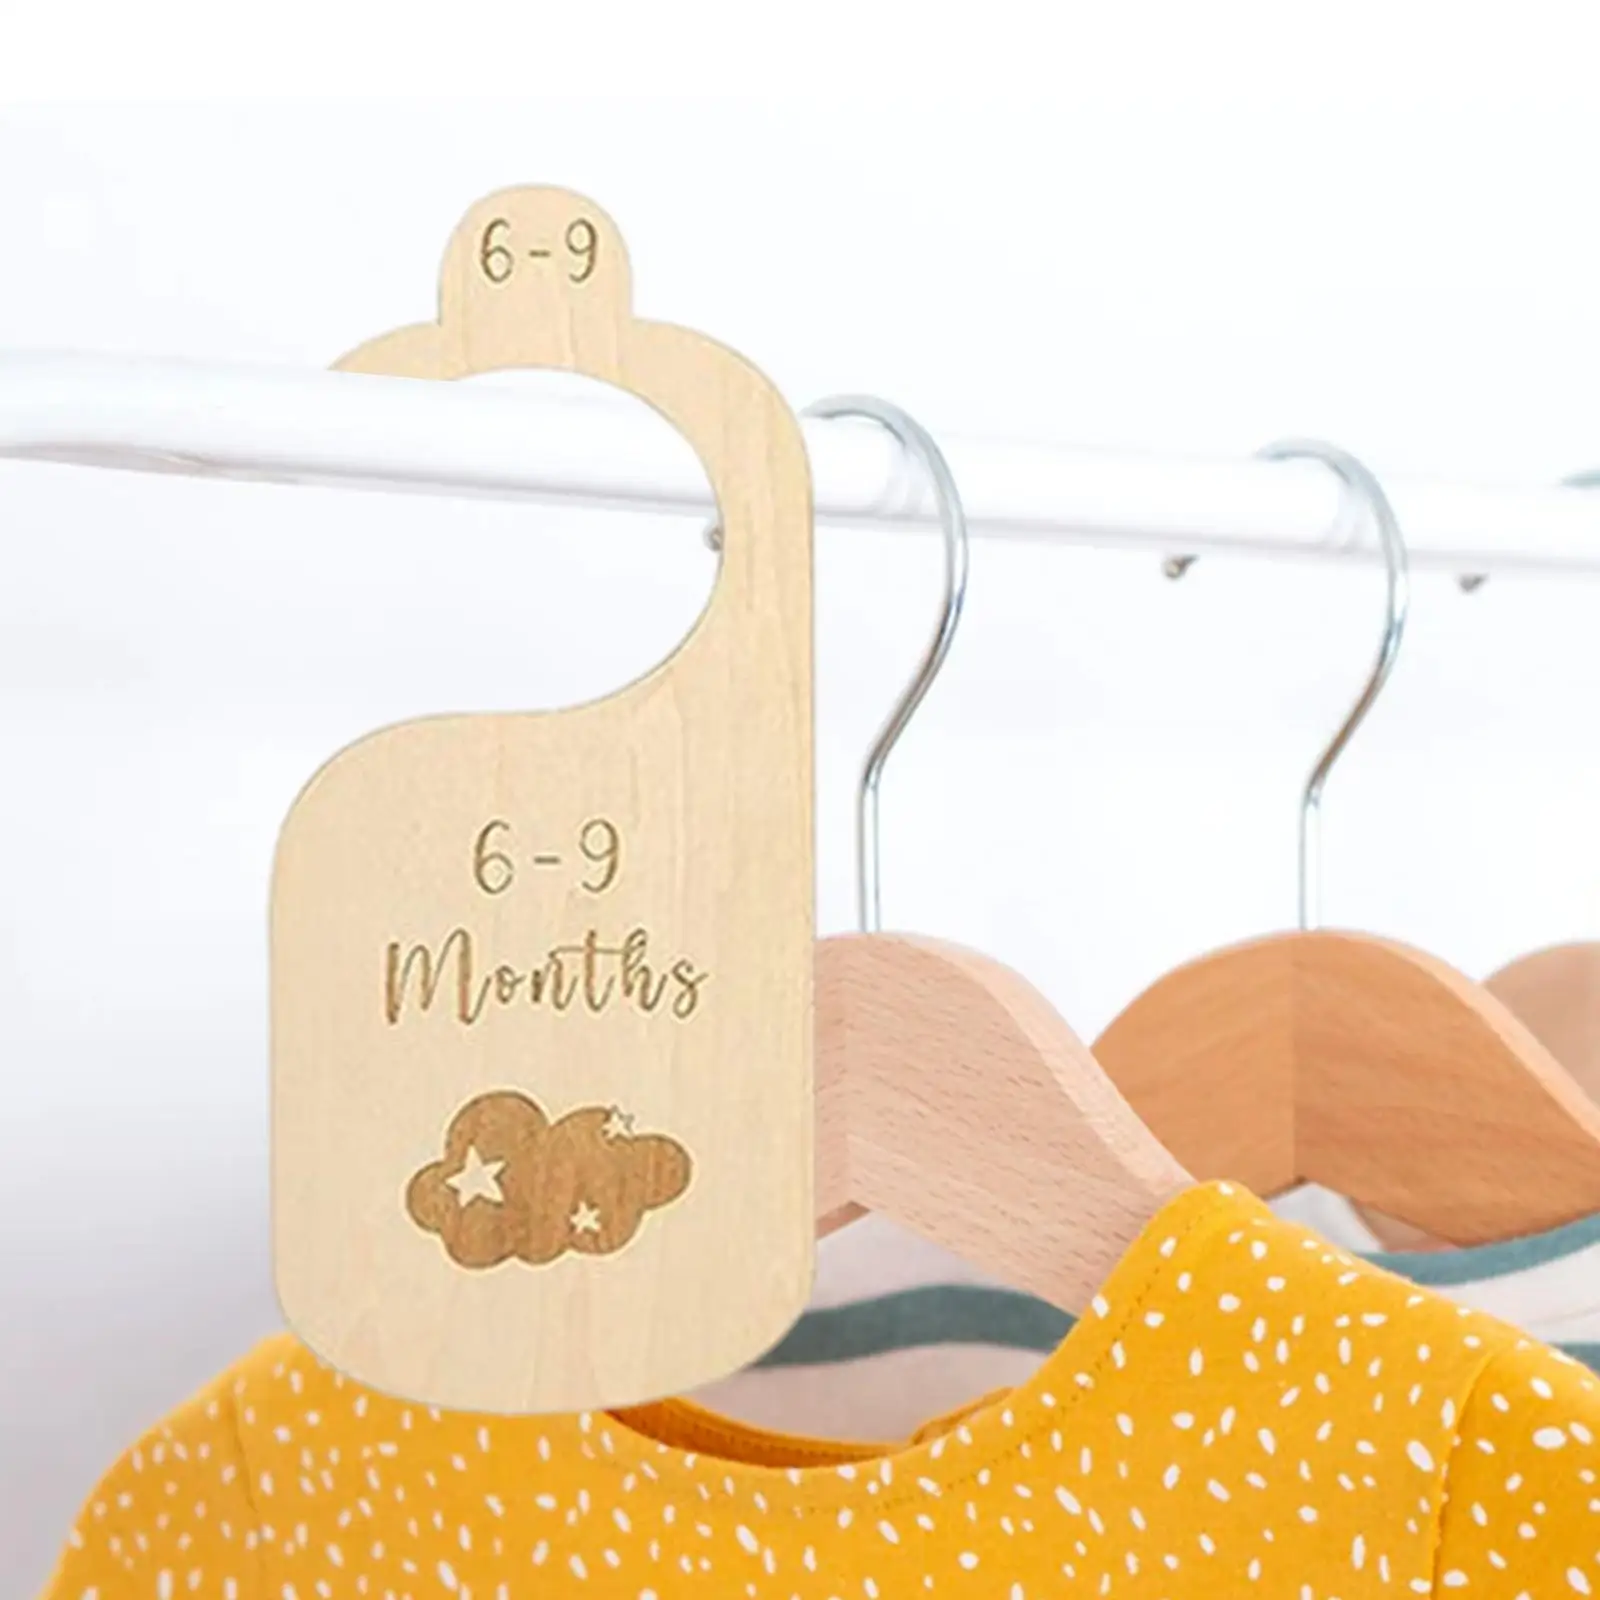 7x Double Sided Wooden Closet Divider Organizer Closet Baby Size Dividers Infant Wardrobe Divider Label New Mom Gift